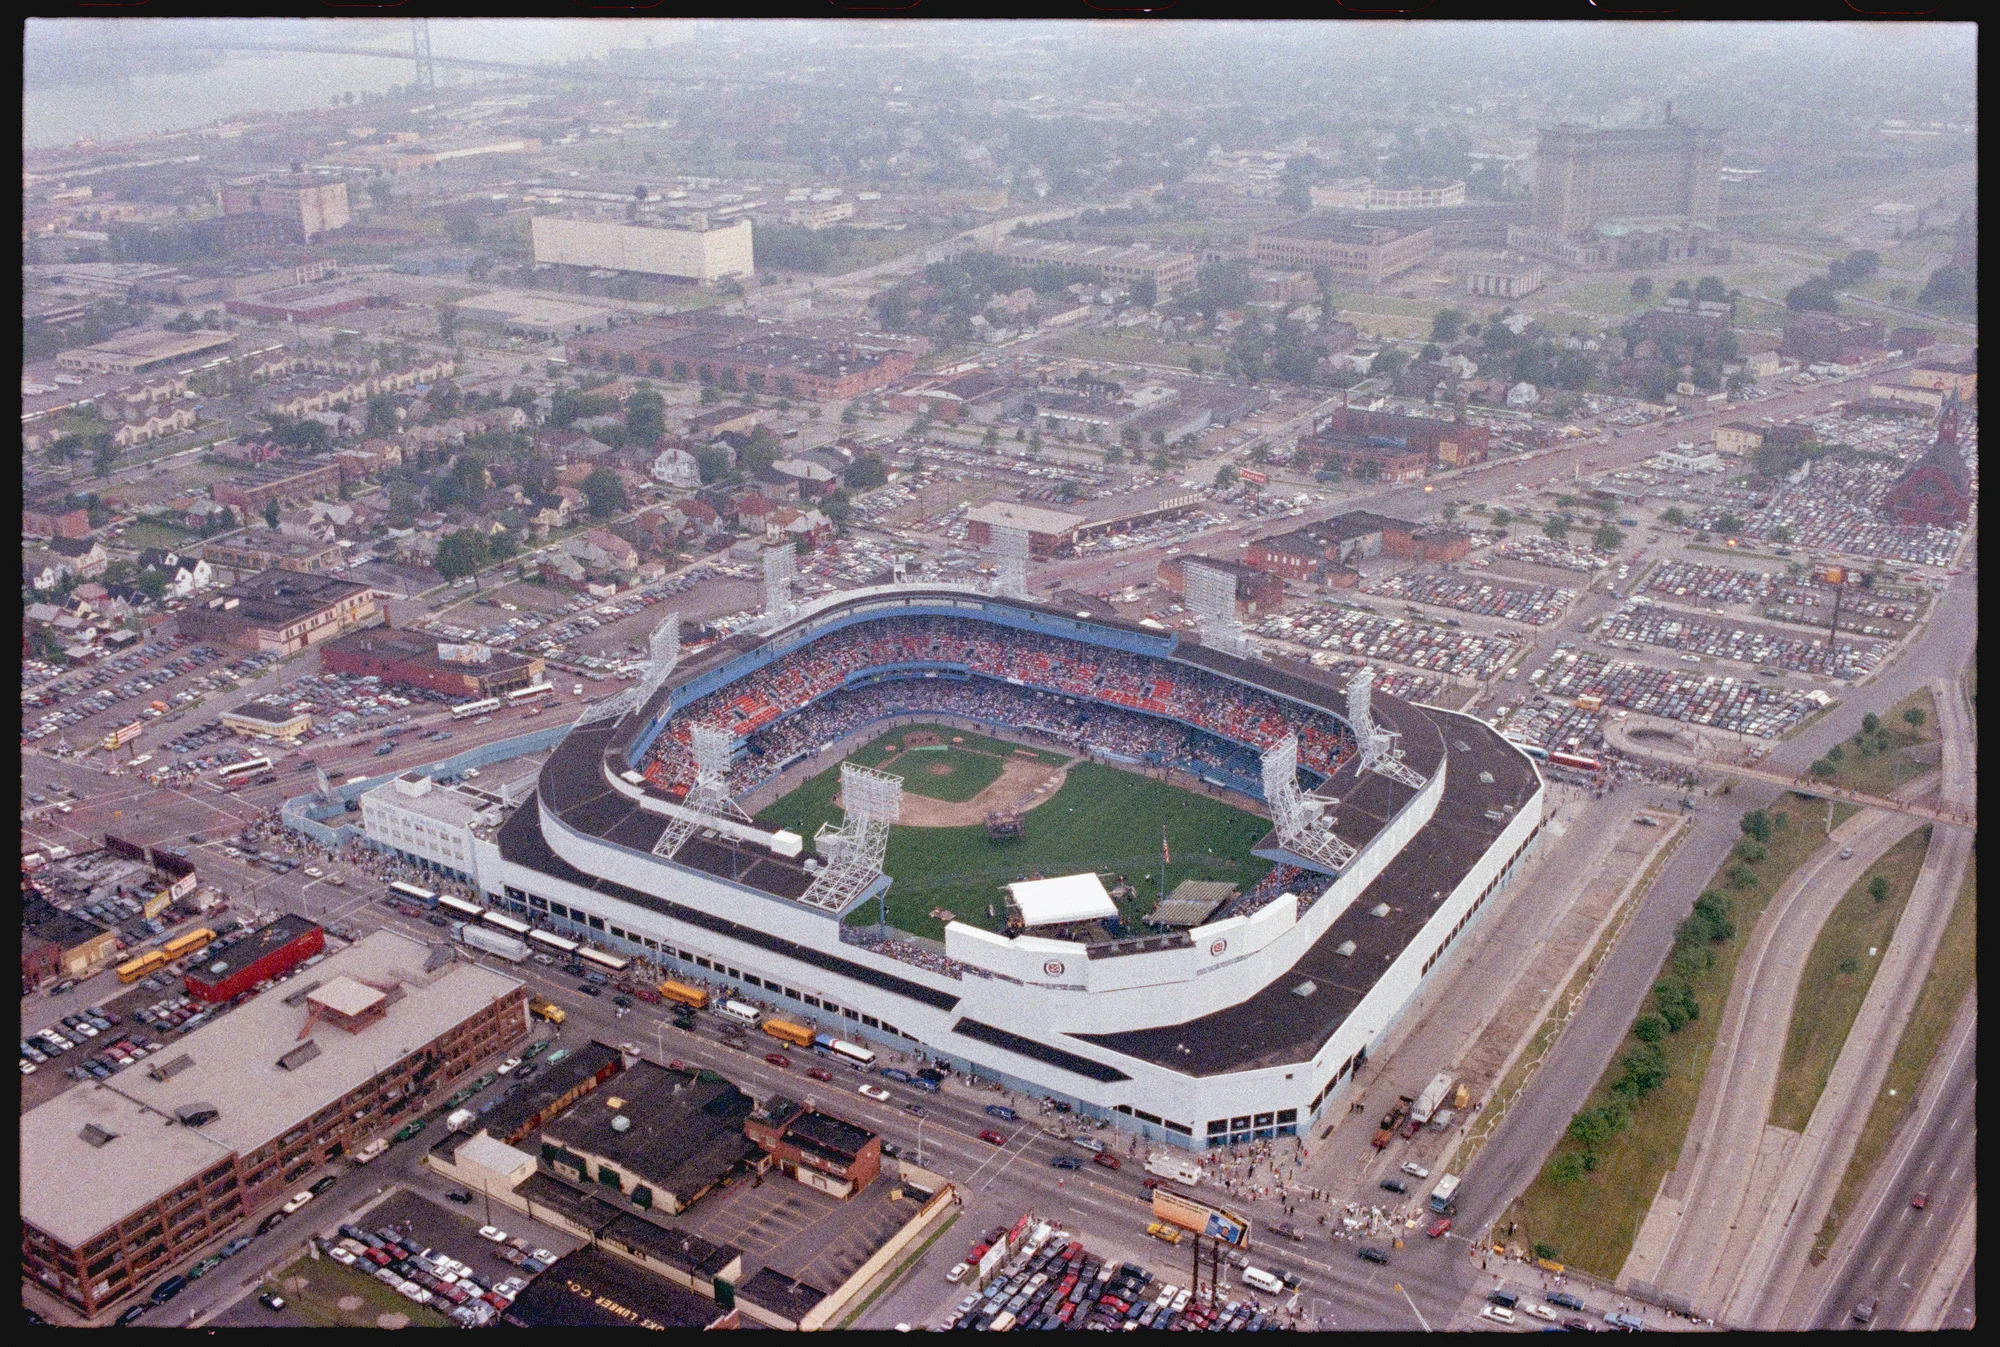 An aerial photograph of Tiger Stadium in Detroit, Michigan.